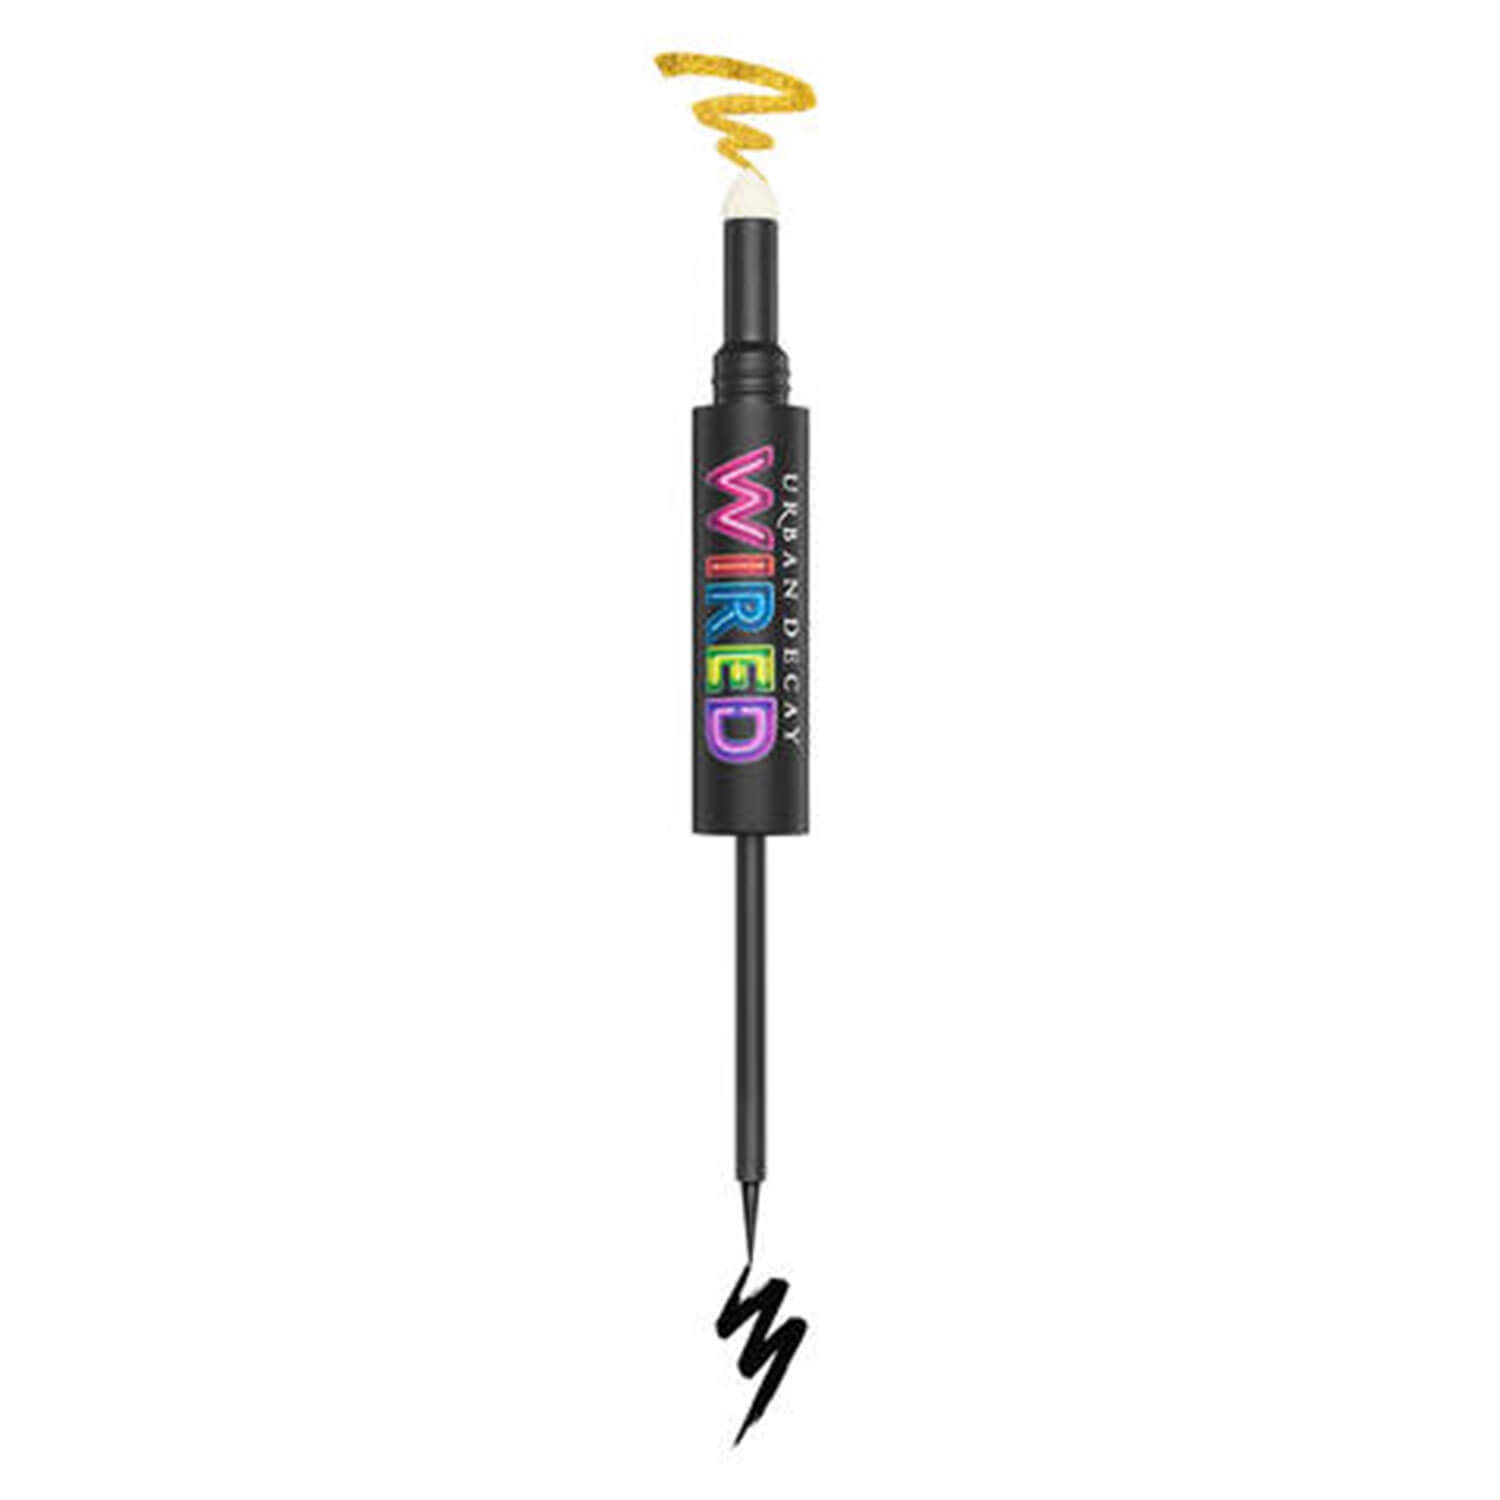 Product image from Wired - Double-Ended Eyeliner & Top Coat Circuit